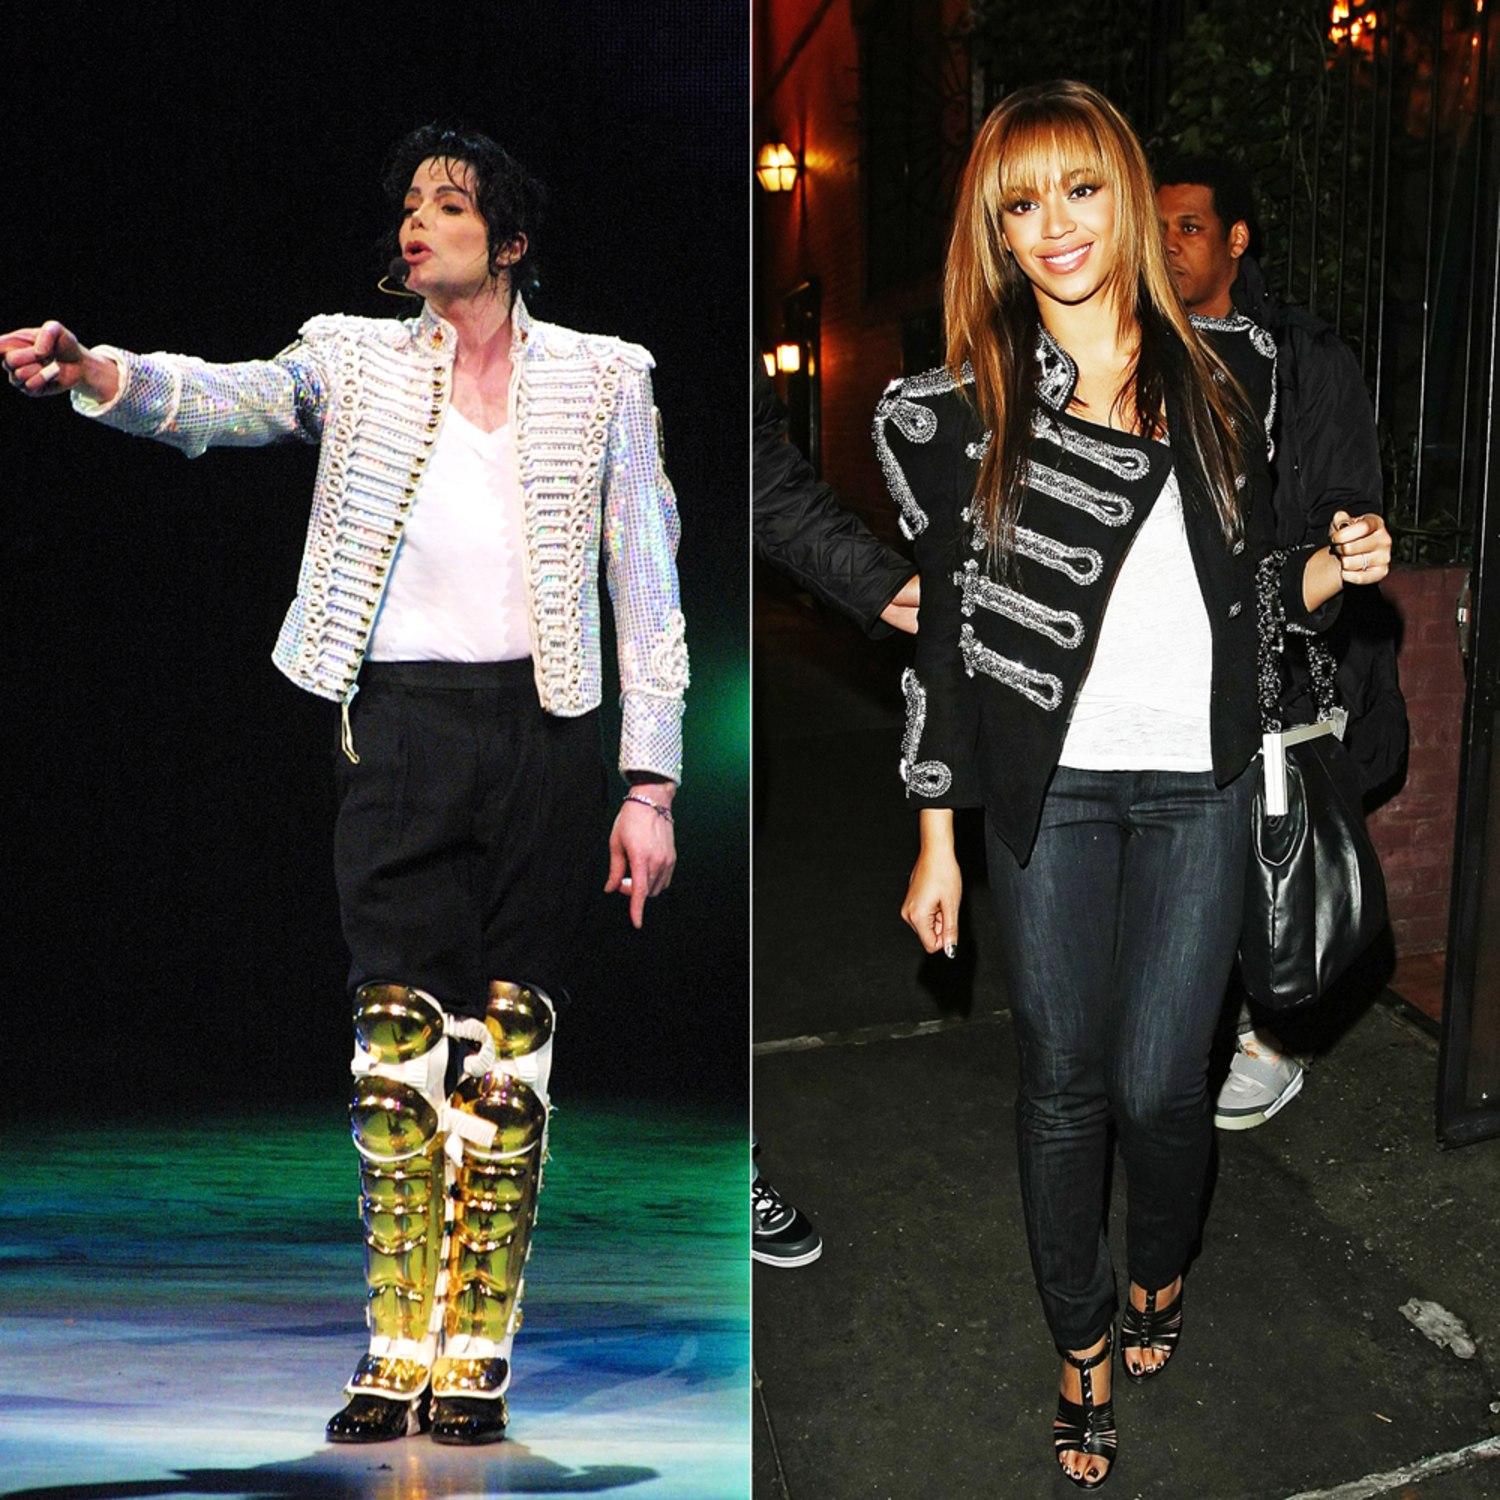 Michael Jackson Outfits that Inspired the Artist in You